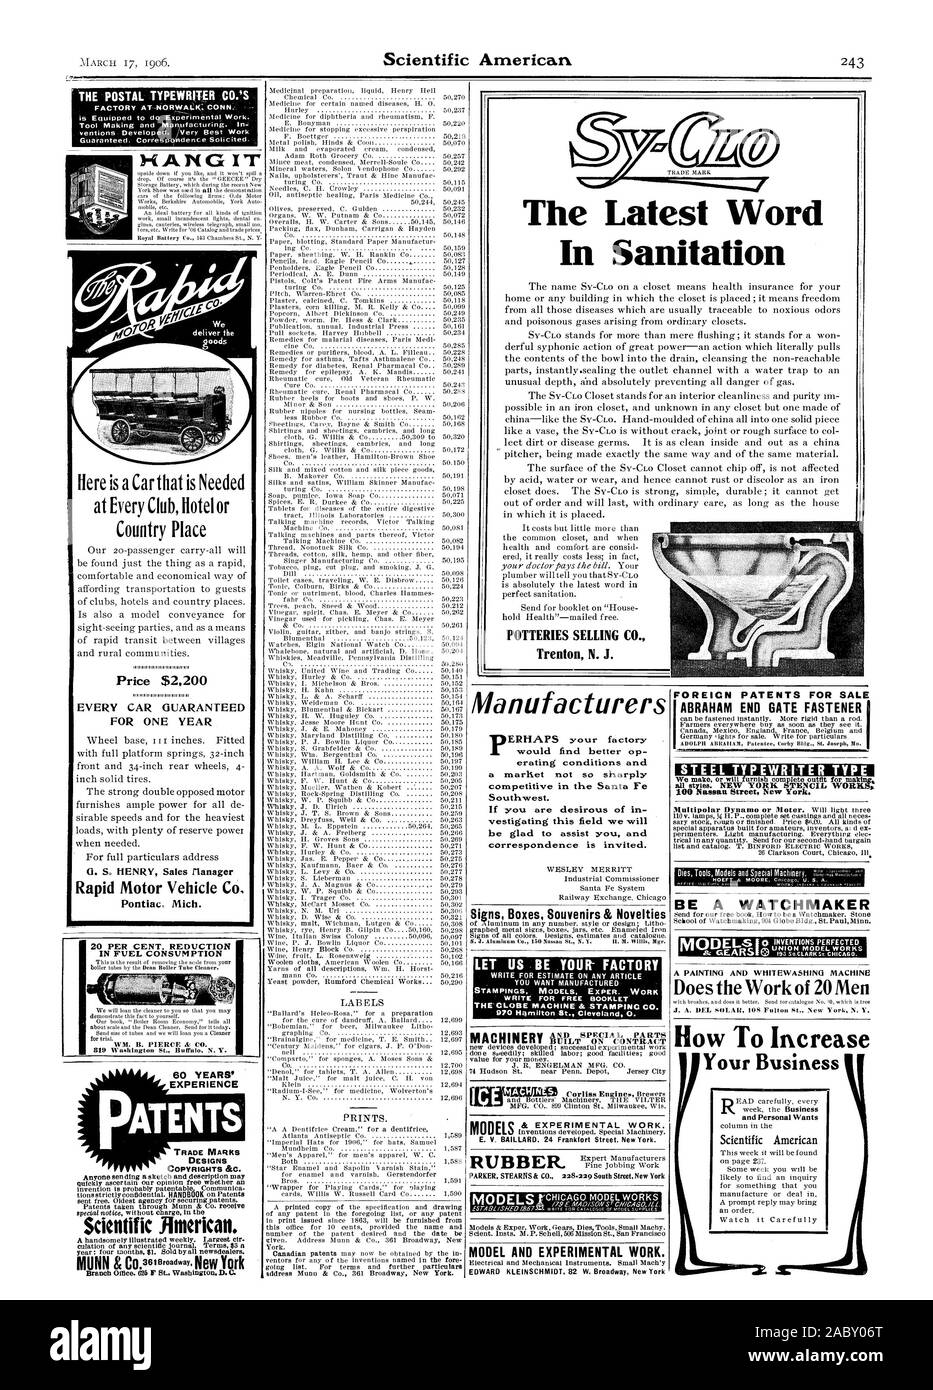 The Latest Word In Sanitation POTTERIES SELLING CO. Trenton N. J. THE POSTAL TYPEWRITER CO.'S  is Equipped to do Experimental Work. Tool Making and Man ifacturing. In Guaranteed. Corresp dence Solicited. HANG IT Price $2200 EVERY CAR GUARANTEED FOR ONE YEAR Rapid Motor Vehicle C Pontiac. Mich. 20 PER CENT. REDUCTION IN FUEL CONSUMPTION WM. B. PIERCE .13 CO. 60 YEARS' EXPERIENCE Manufacturers would find better op erating conditions and a marKet not so sharply competitive in the Santa Fe Southwest. vestigating this field we will be glad to assist you and correspondence is invited. Signs Boxes Stock Photo